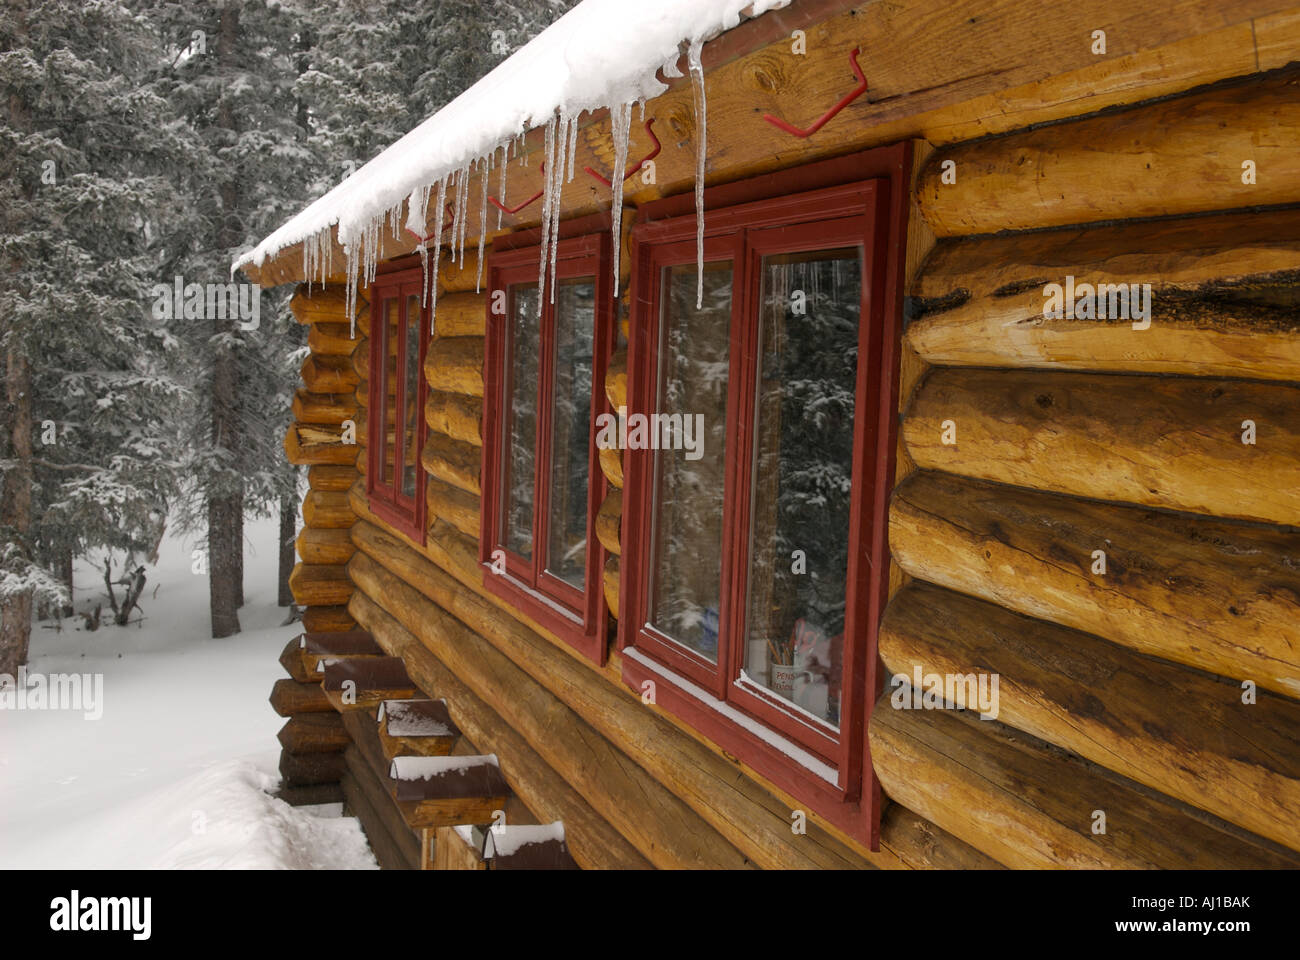 Icicles on the snow covered exterior of a log cabin Peter Estin Ski Hut 10th Mountain Division Hut System, CO, USA Stock Photo